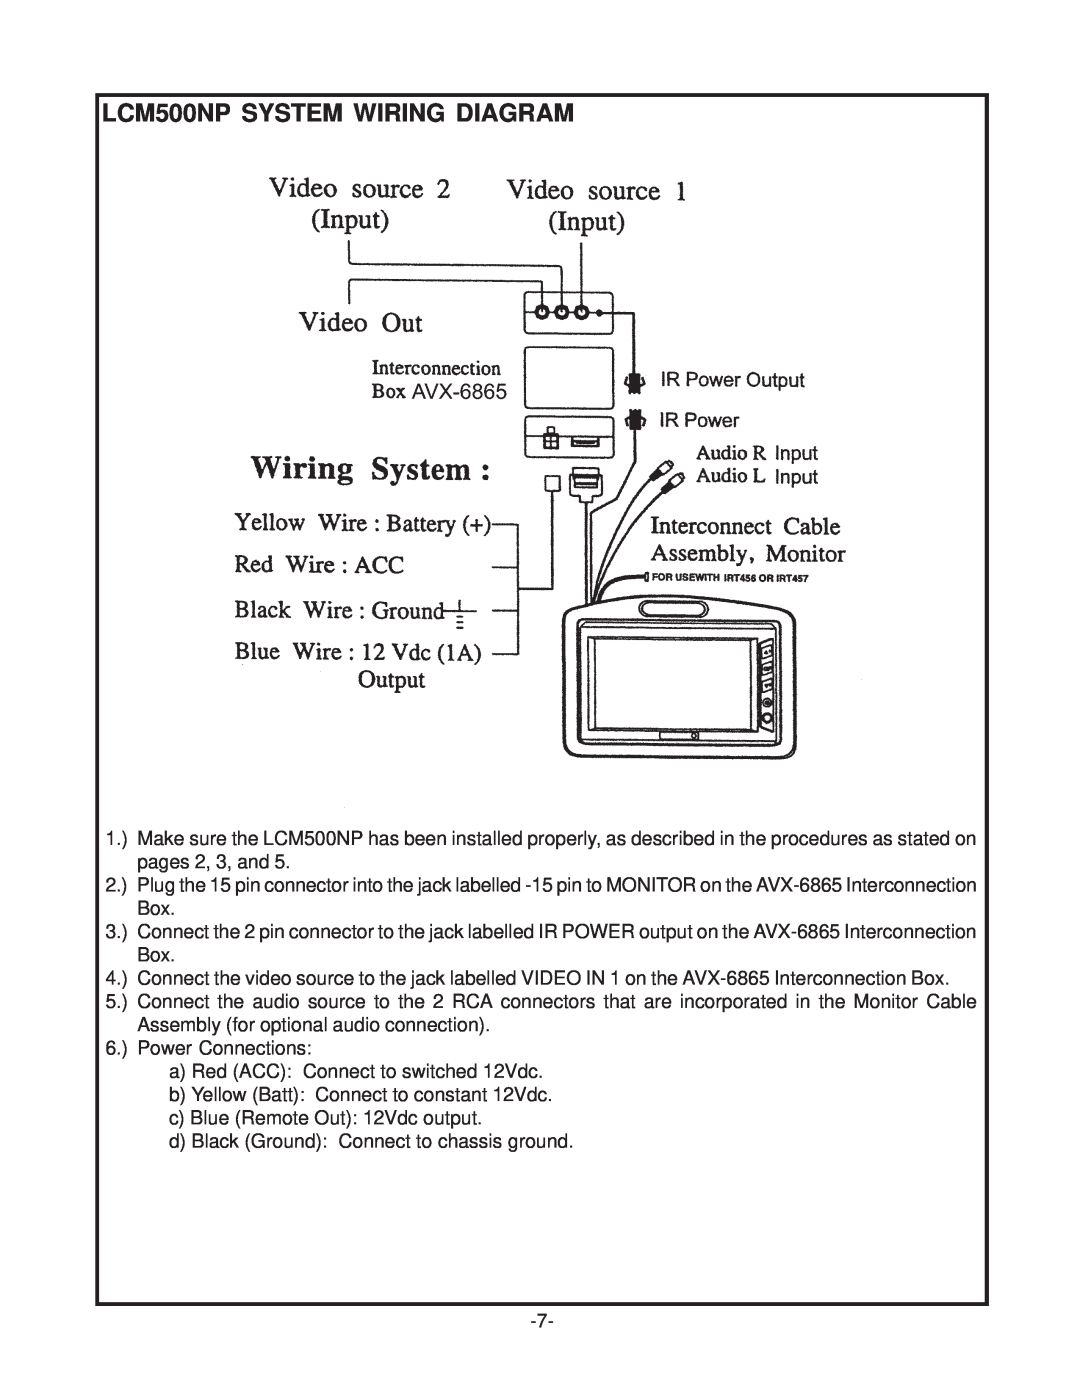 Audiovox operation manual LCM500NP SYSTEM WIRING DIAGRAM 